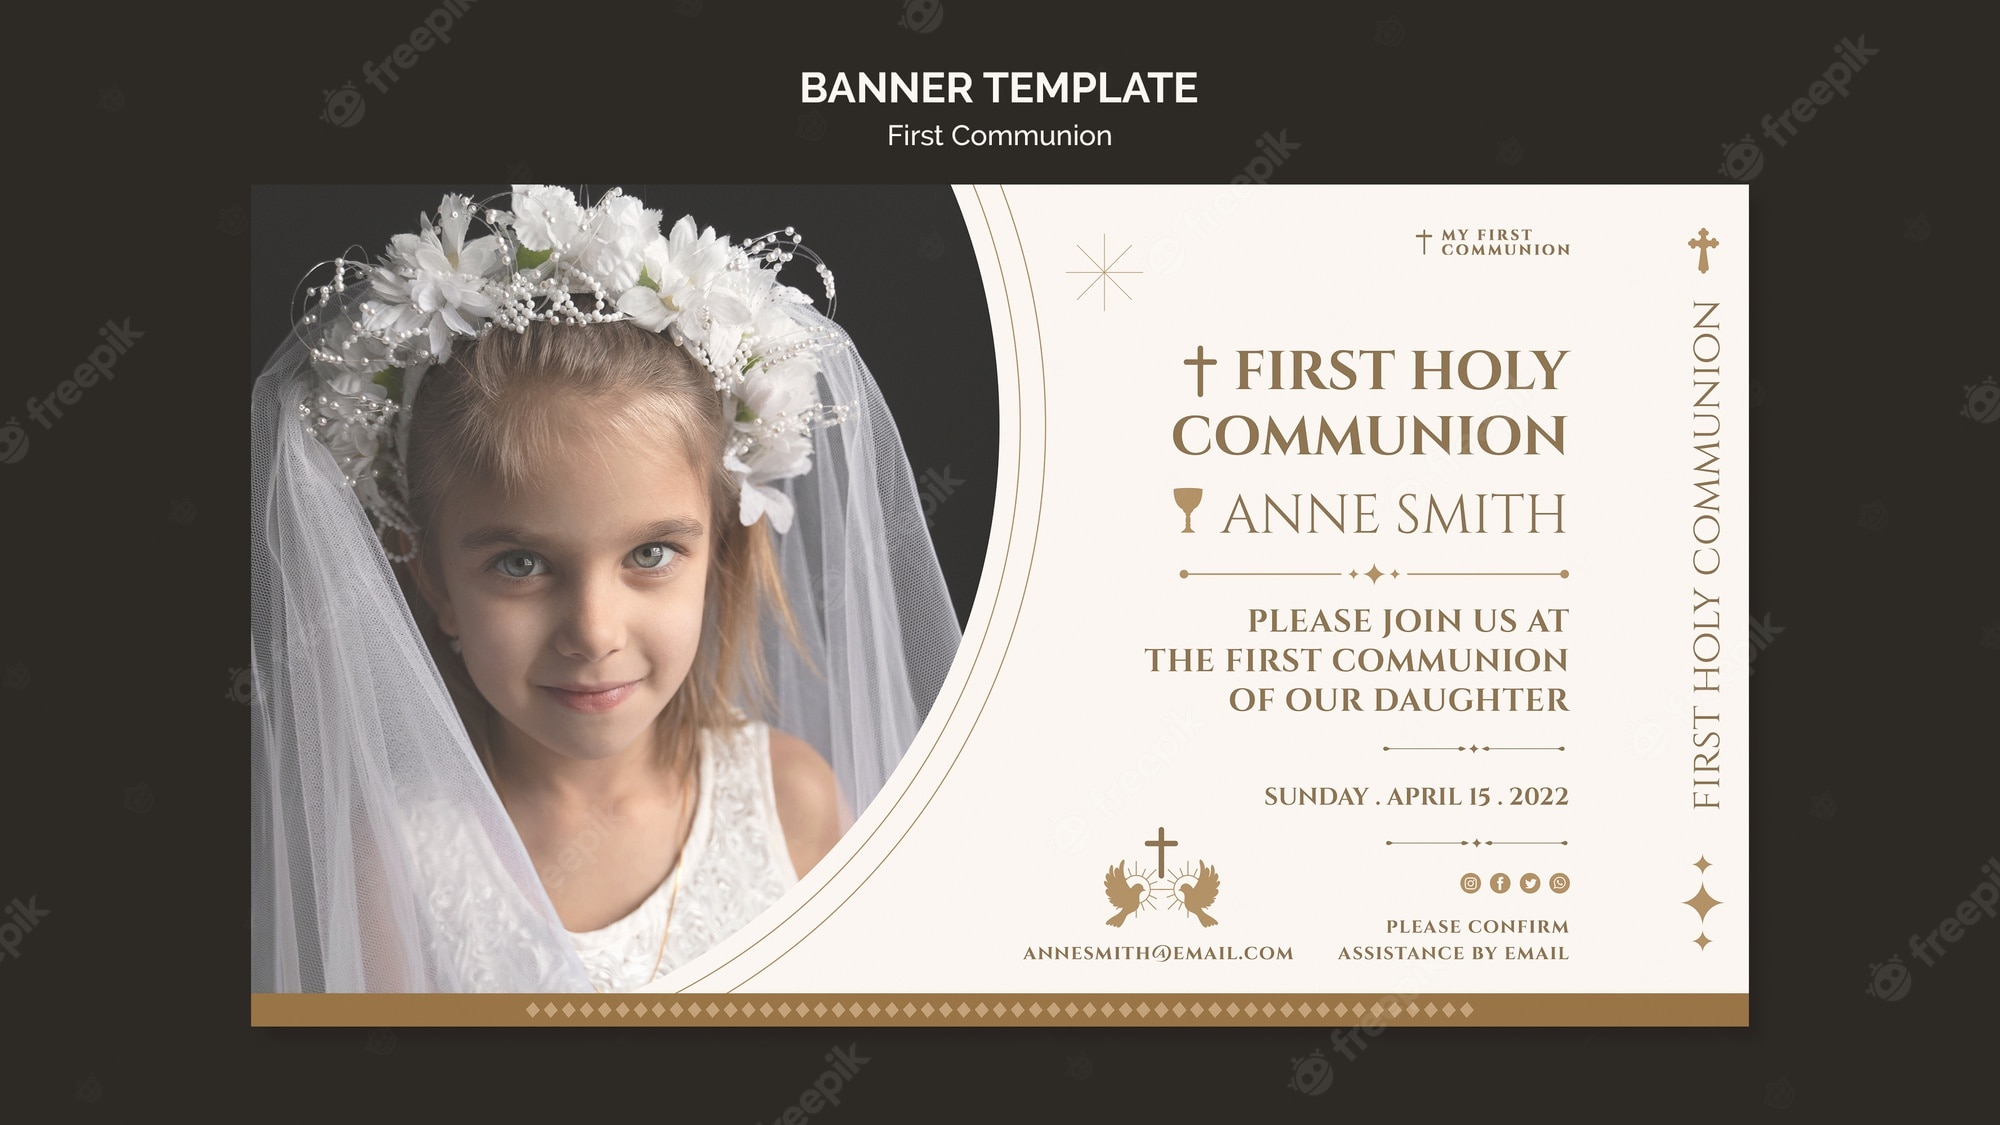 First Communion PSD, 10+ High Quality Free PSD Templates for Download Pertaining To First Holy Communion Banner Templates